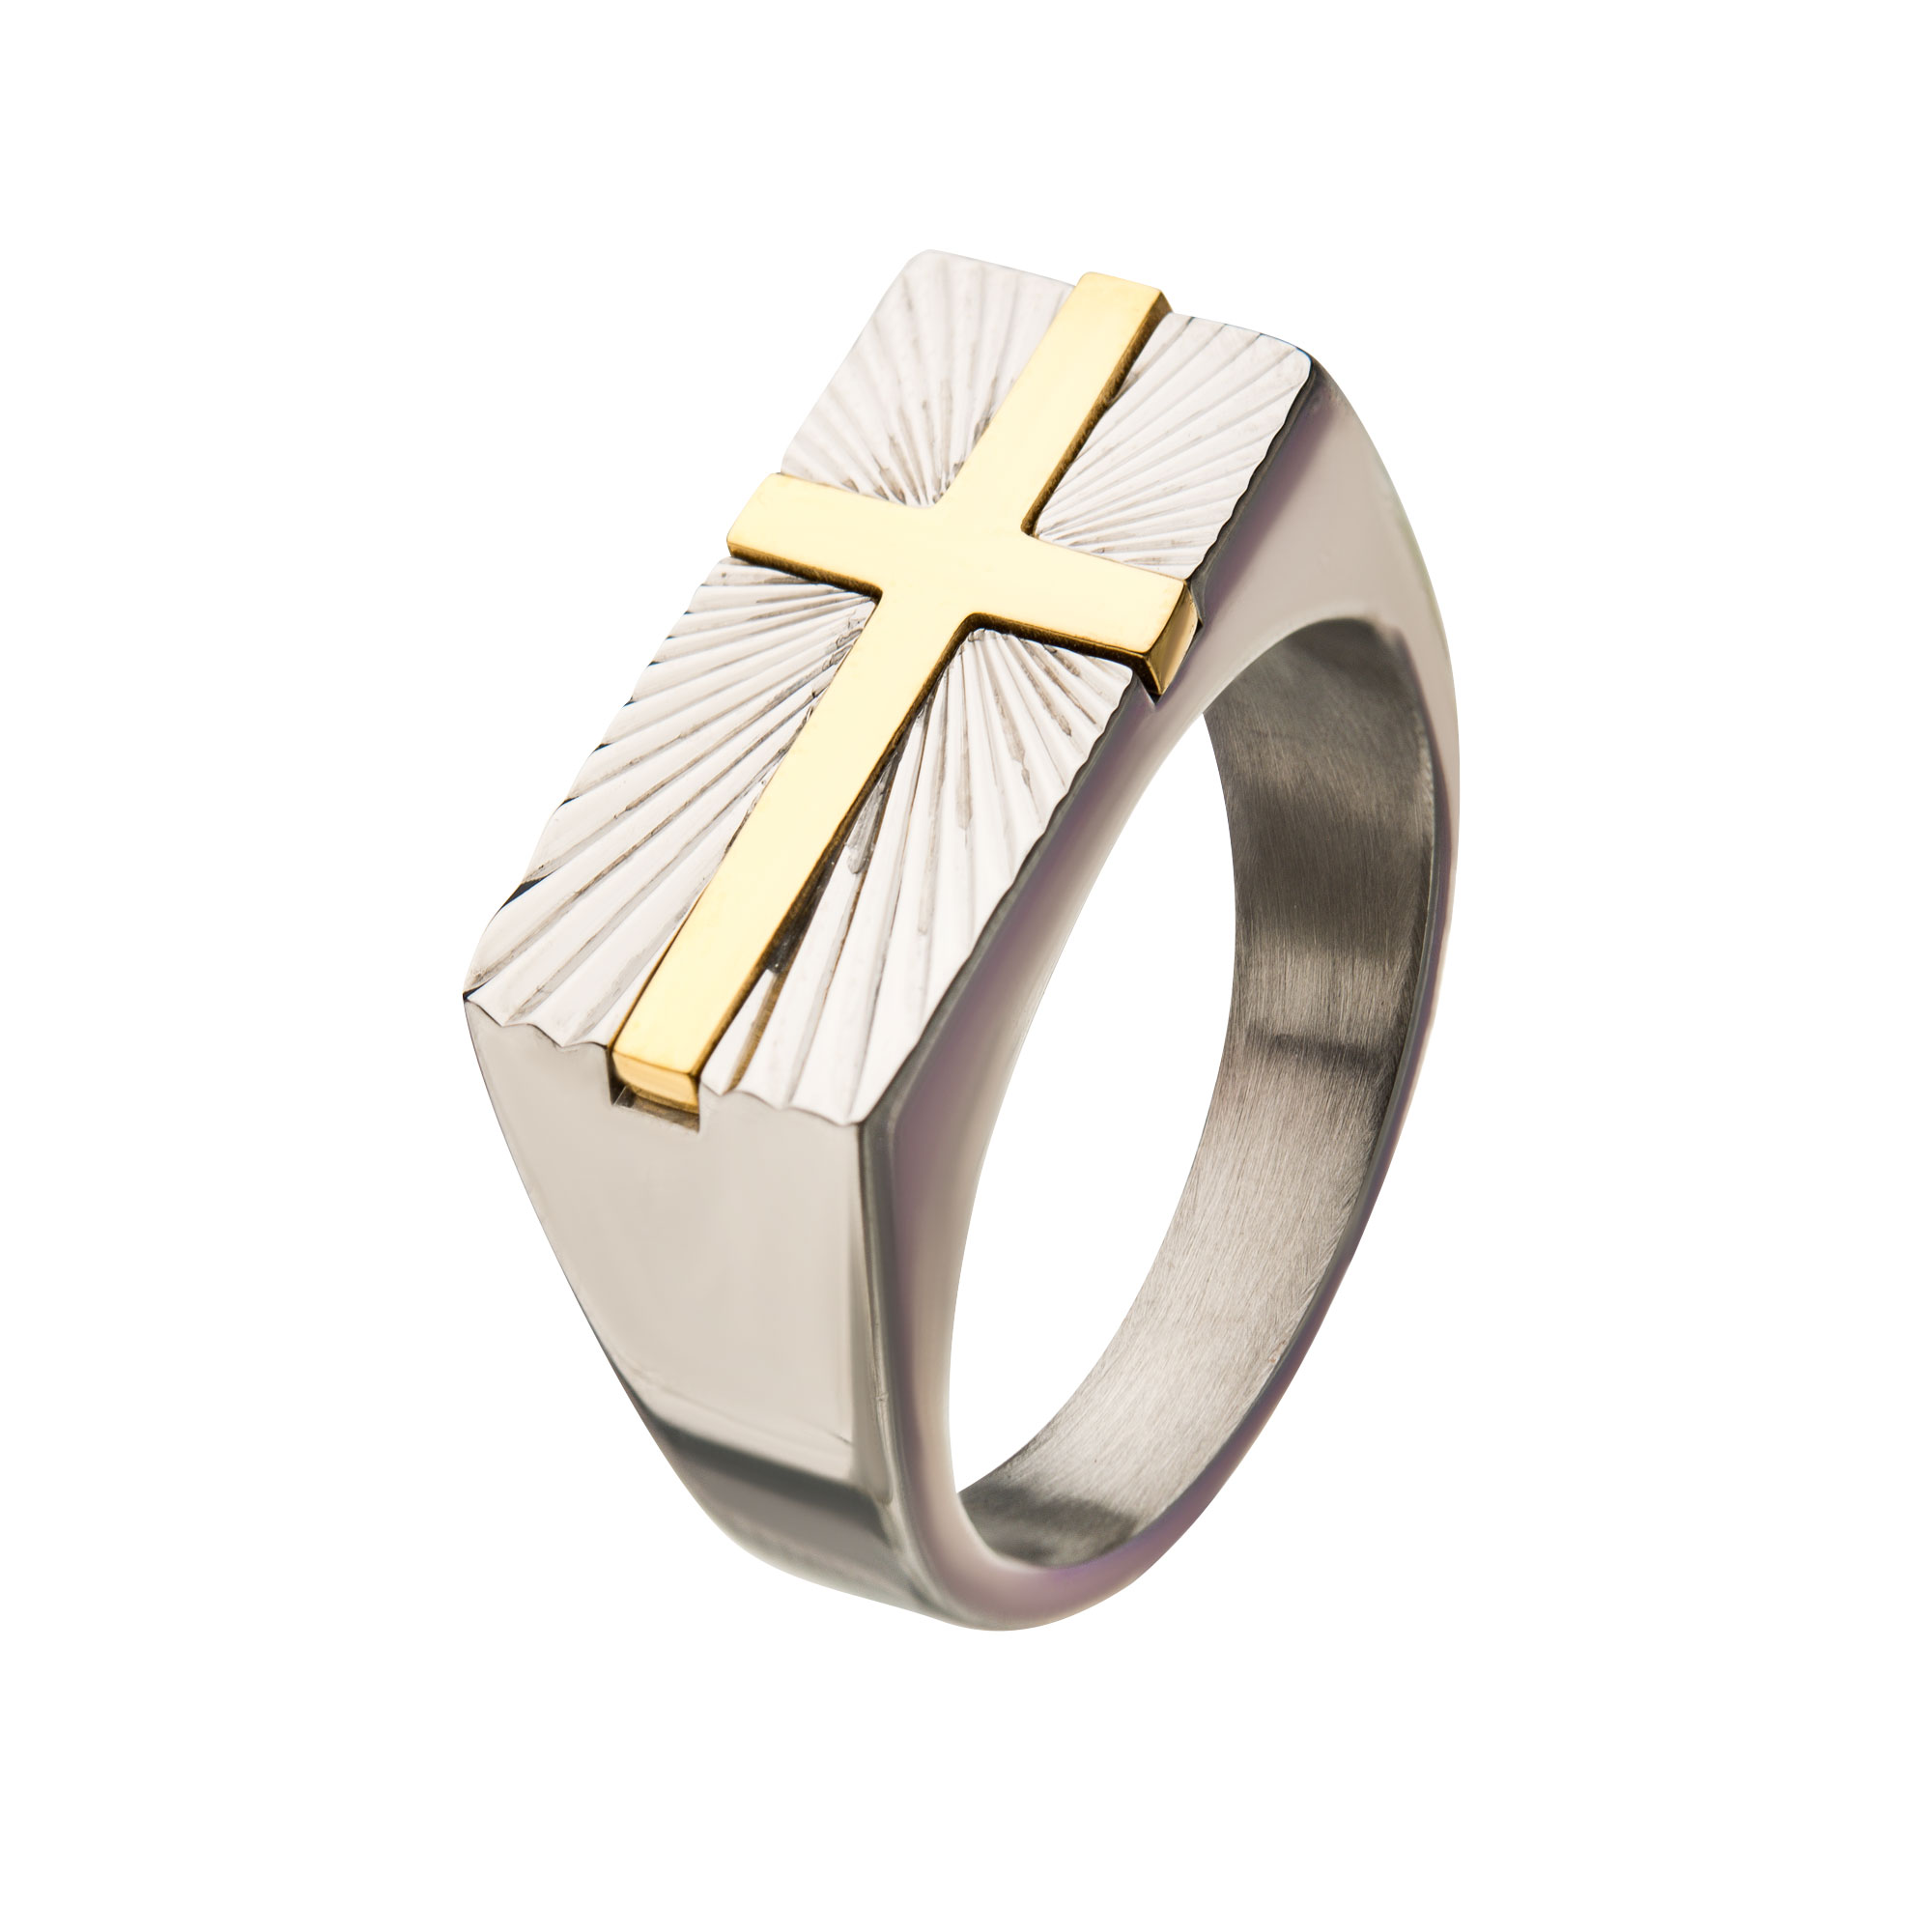 Stainless Steel with  Gold Plated Transfiguration Cross Ring Milano Jewelers Pembroke Pines, FL